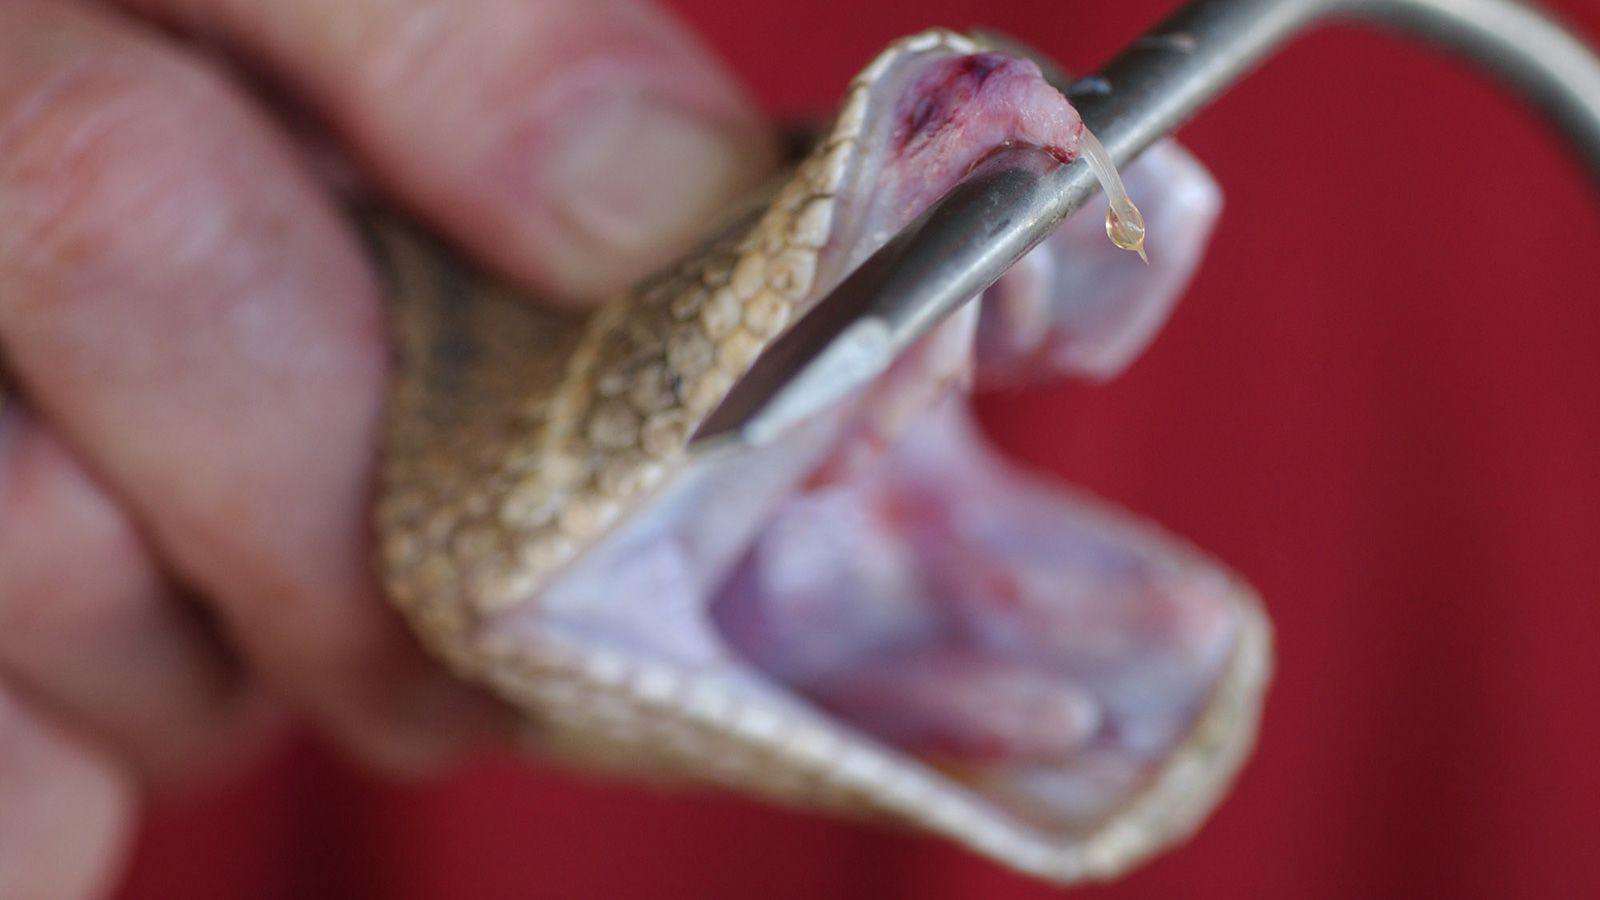 What to Do After Rattlesnake Bite?